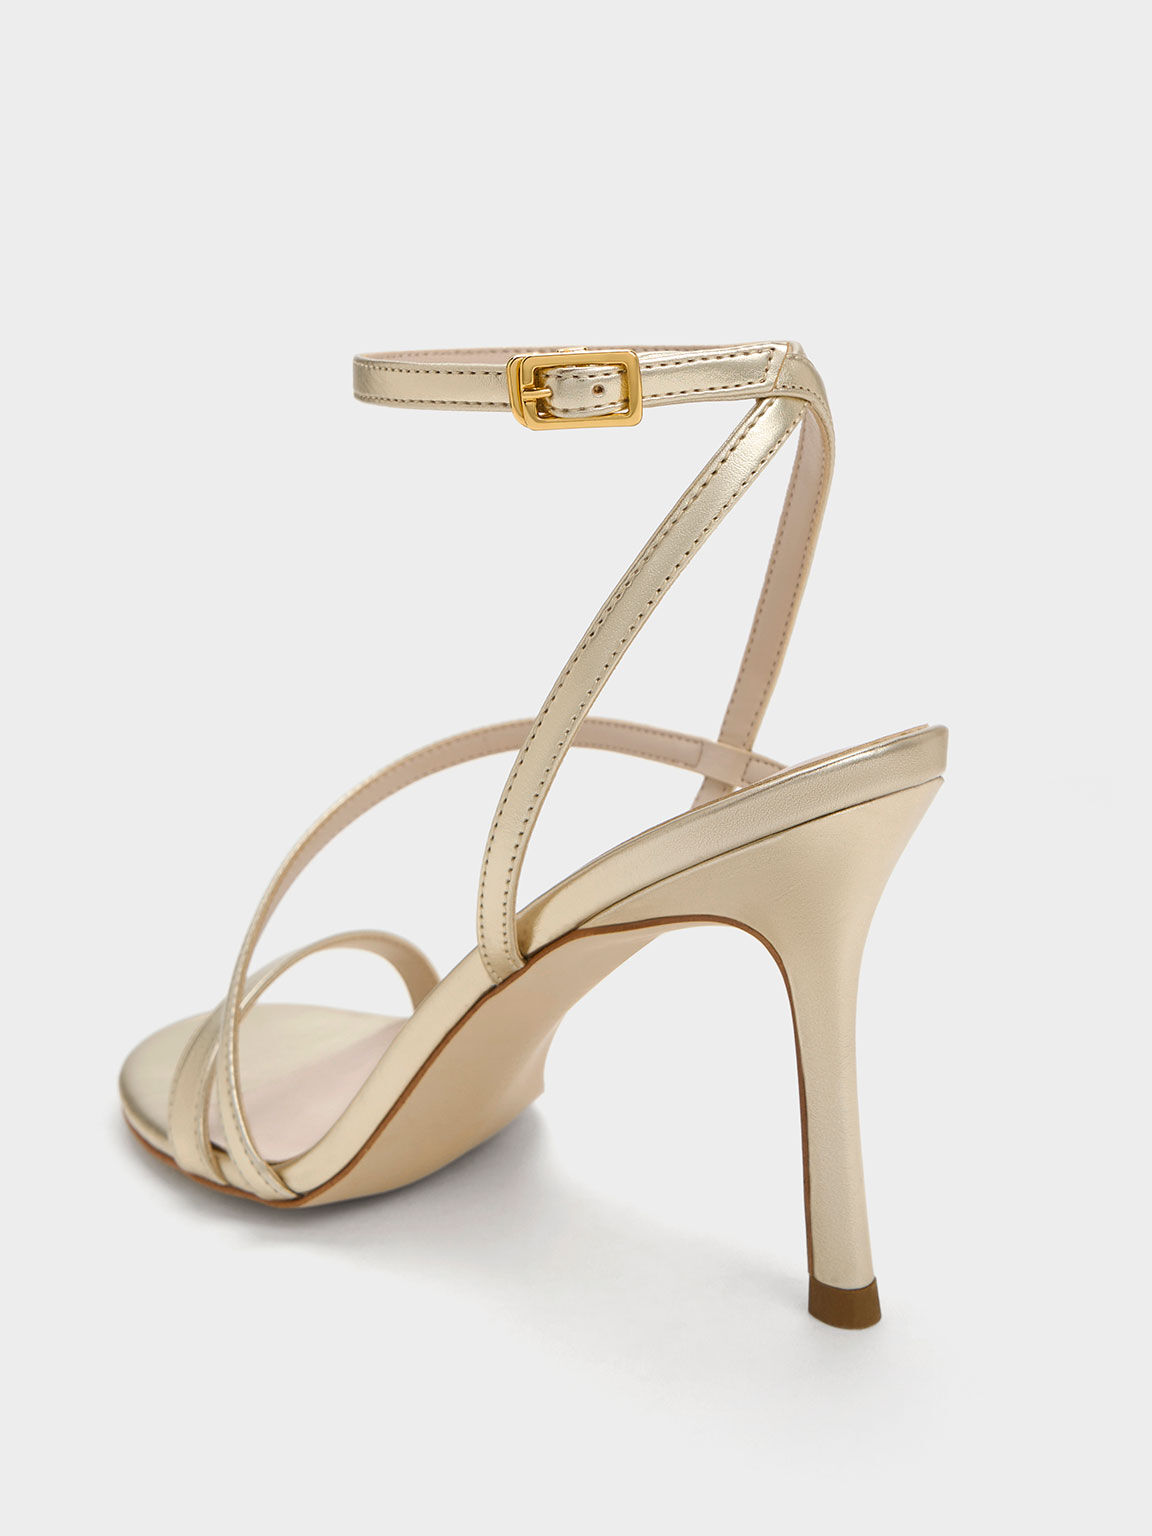 Gold Metallic Asymmetric Strappy Heeled Sandals - CHARLES & KEITH US